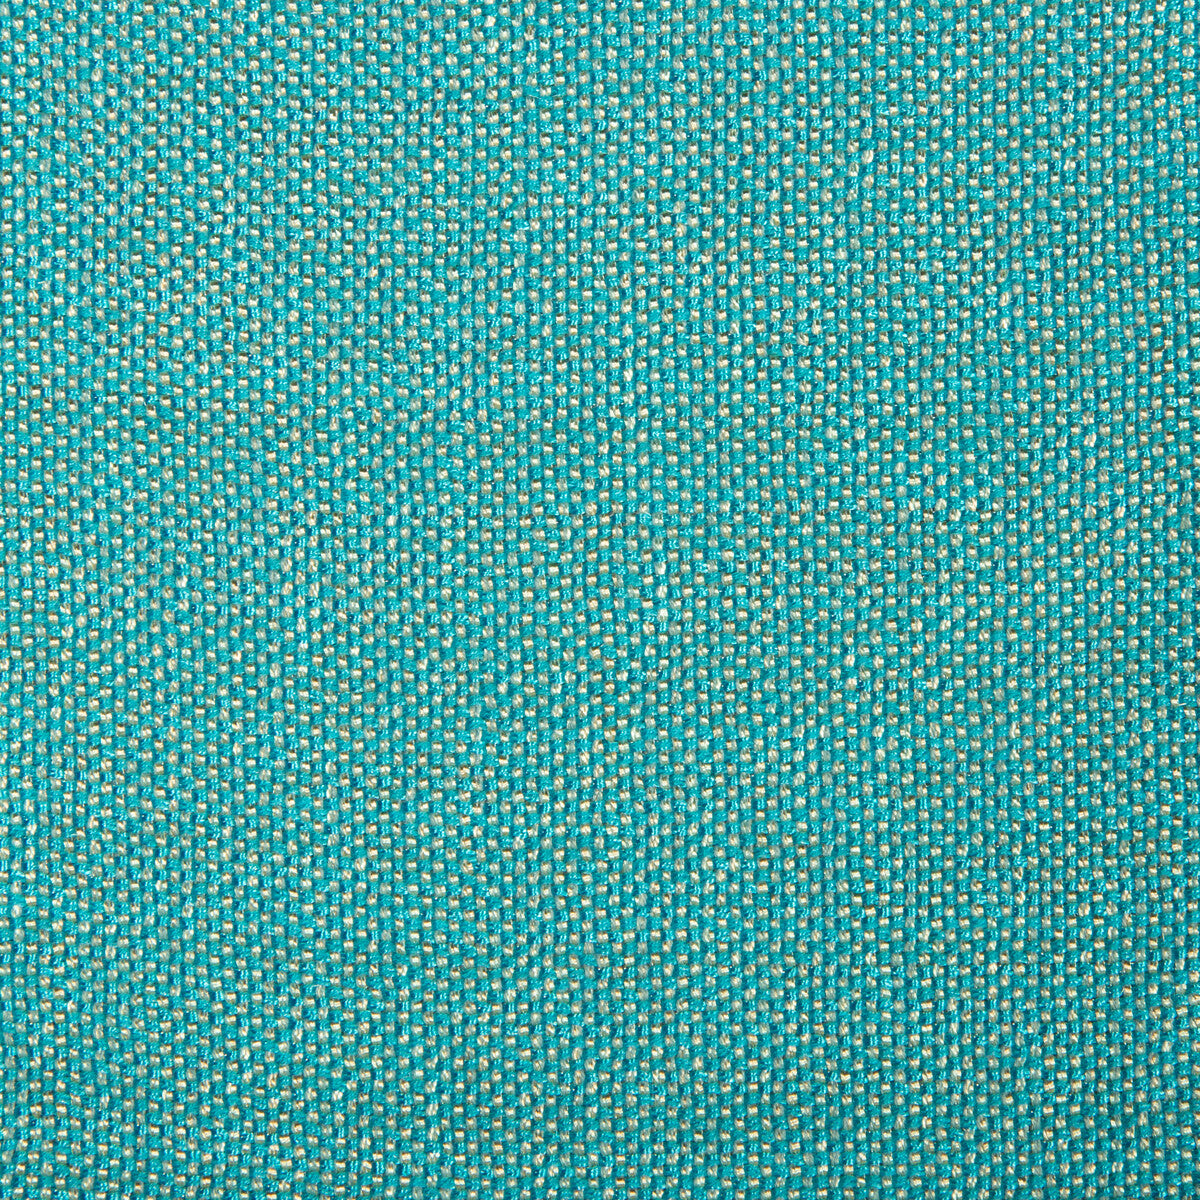 Kravet Contract fabric in 4458-113 color - pattern 4458.113.0 - by Kravet Contract